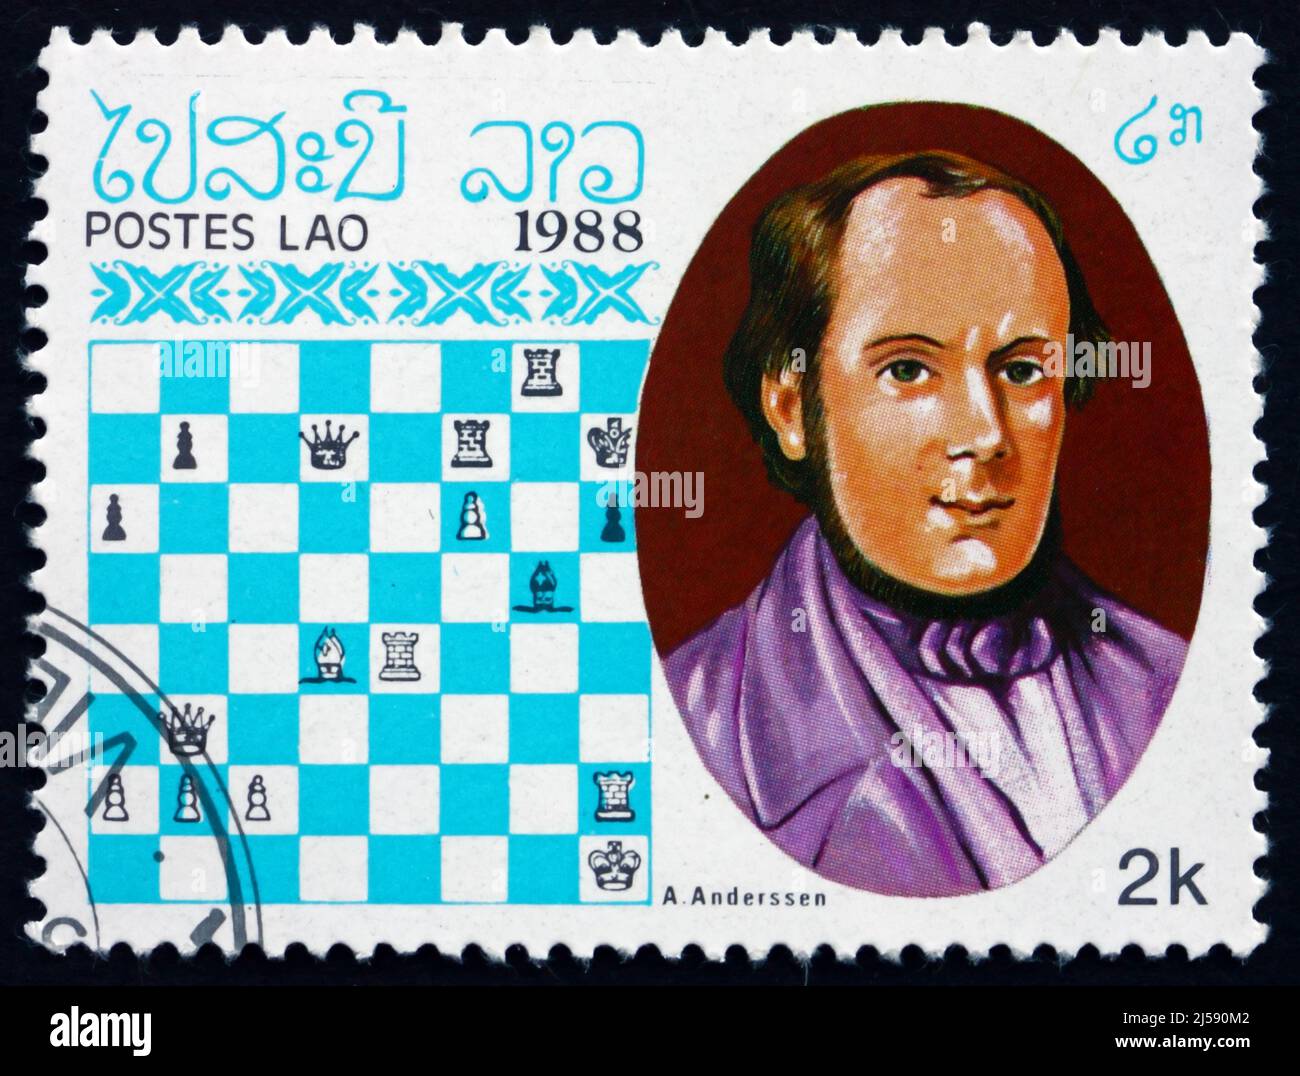 Stamp 2019, Angola World chess championship s/s, 2019 - Collecting Stamps -   - The free online stampcatalogue with over 500.000  stamps listed.